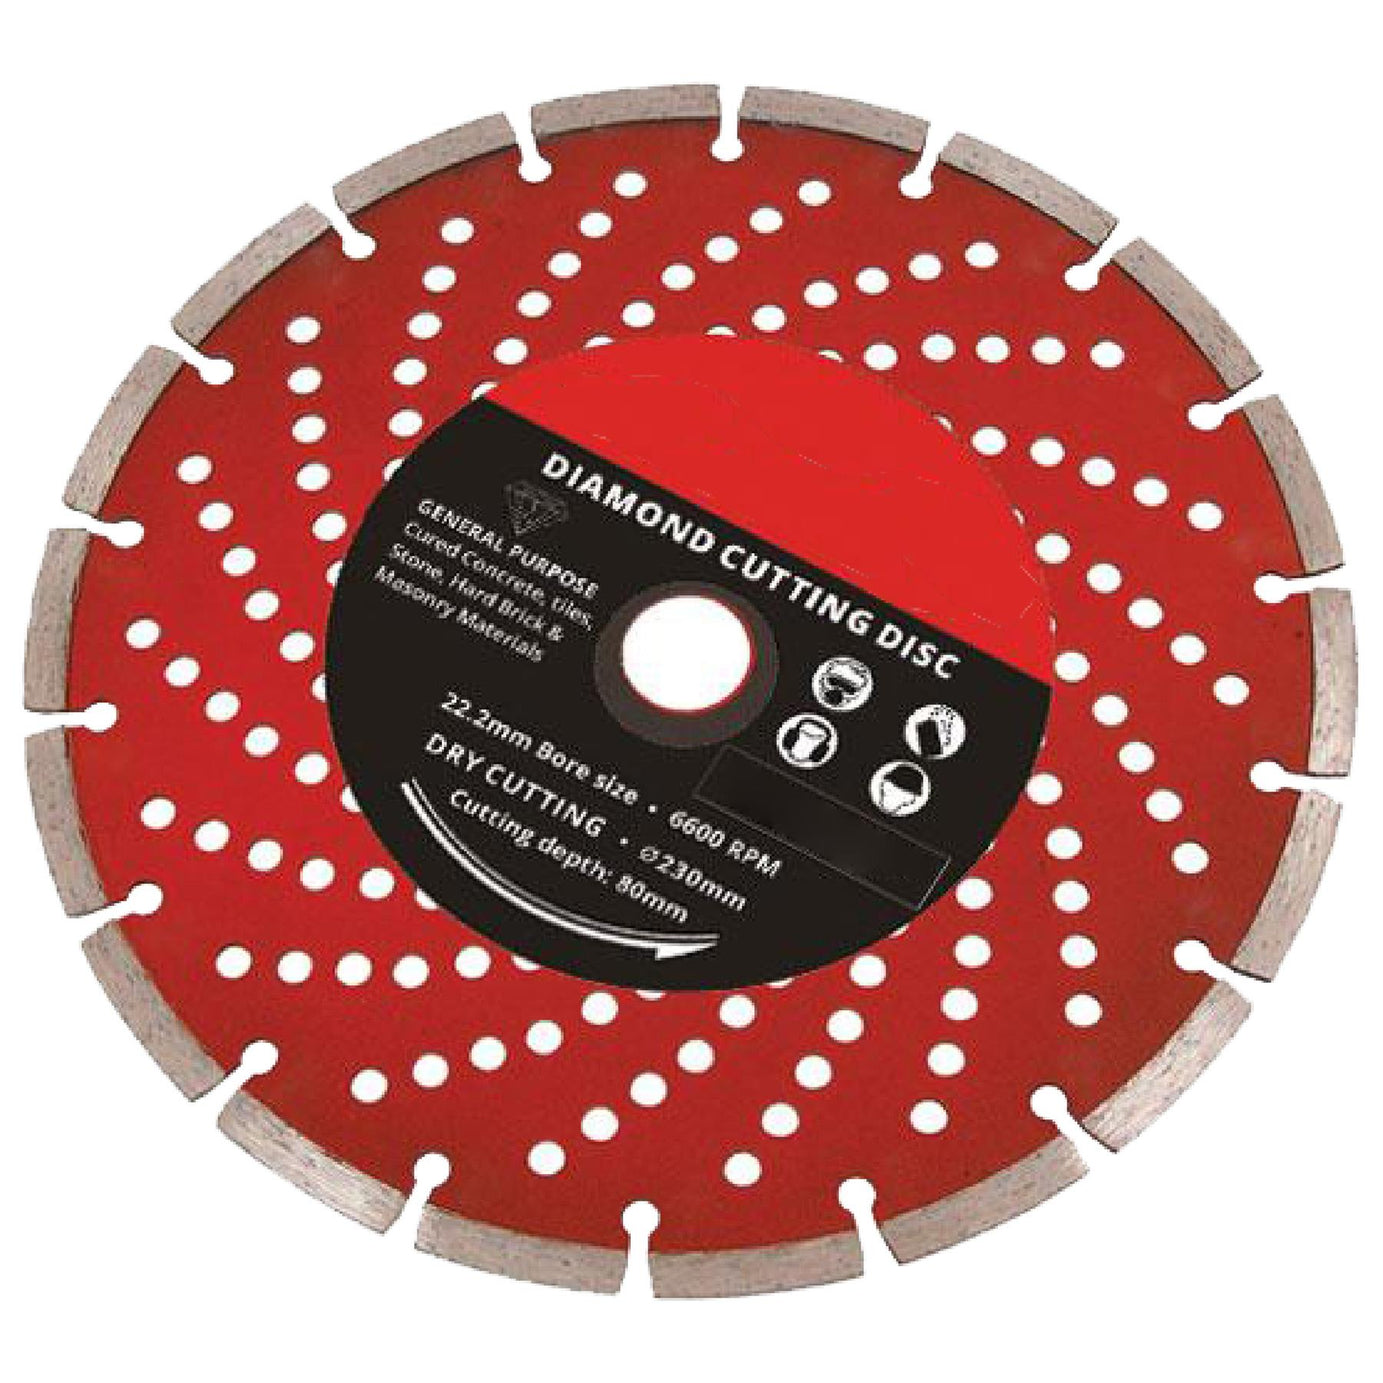 DIAMOND Blade DISC Angle Grinder Cutter Saw Dry Cutting 9 inch / 230mm